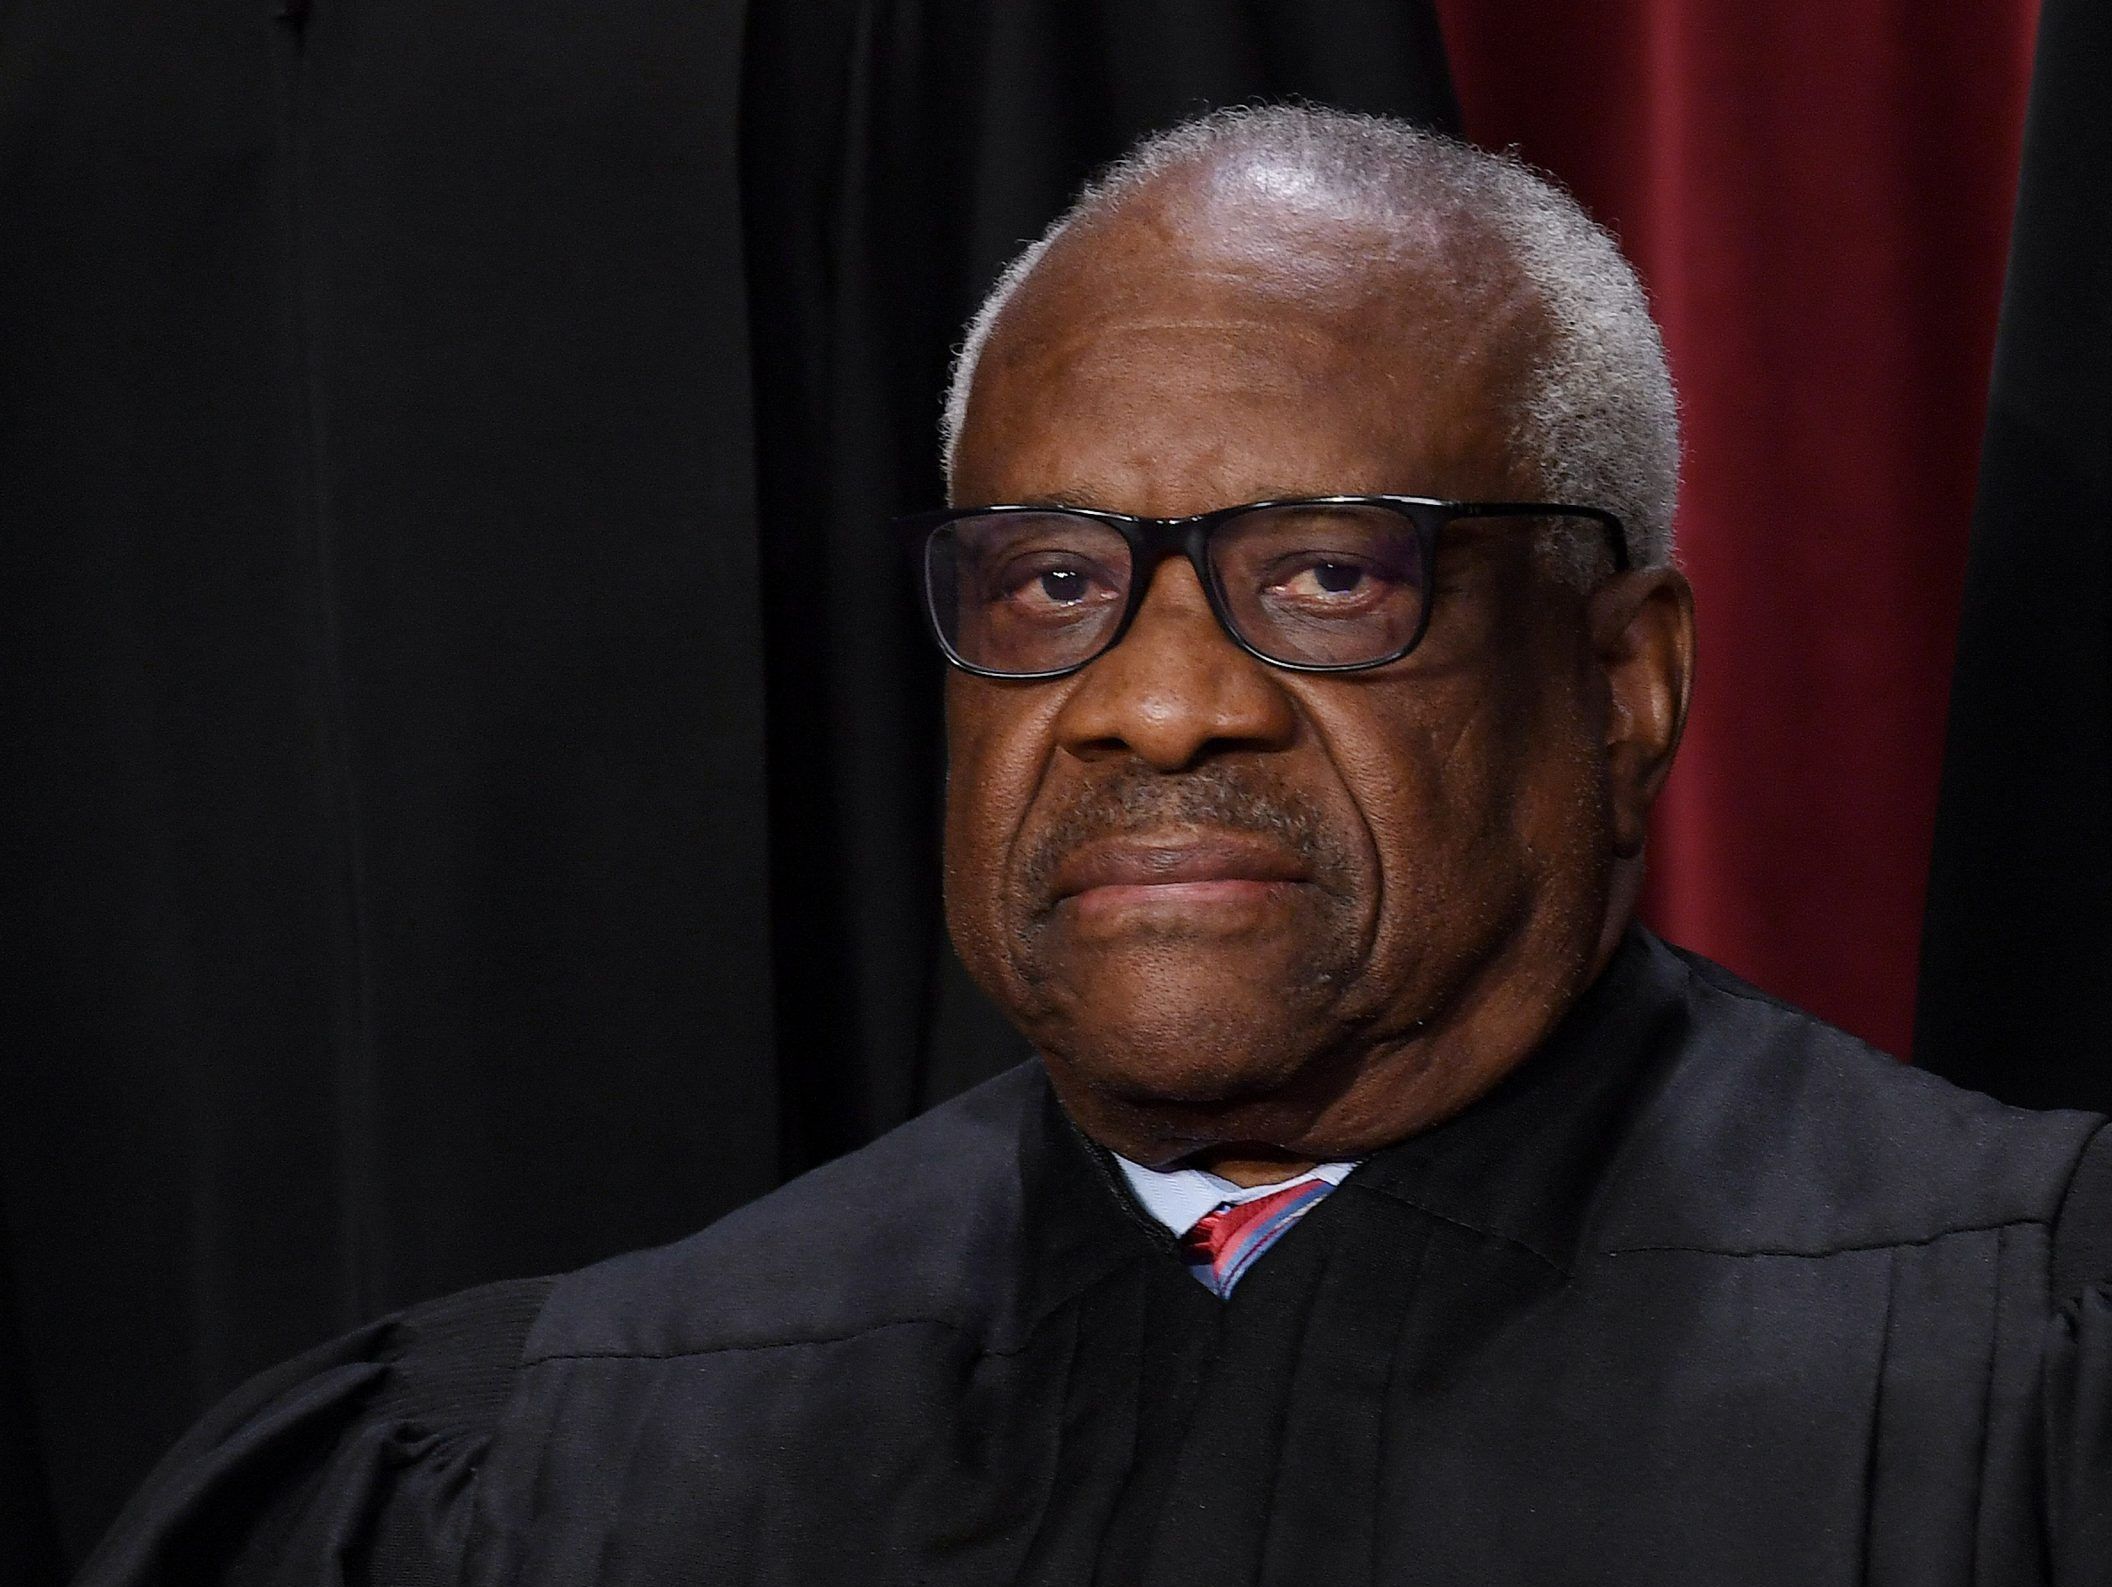 Clarence Thomas, Sonia Sotomayor, other justices remember RBG